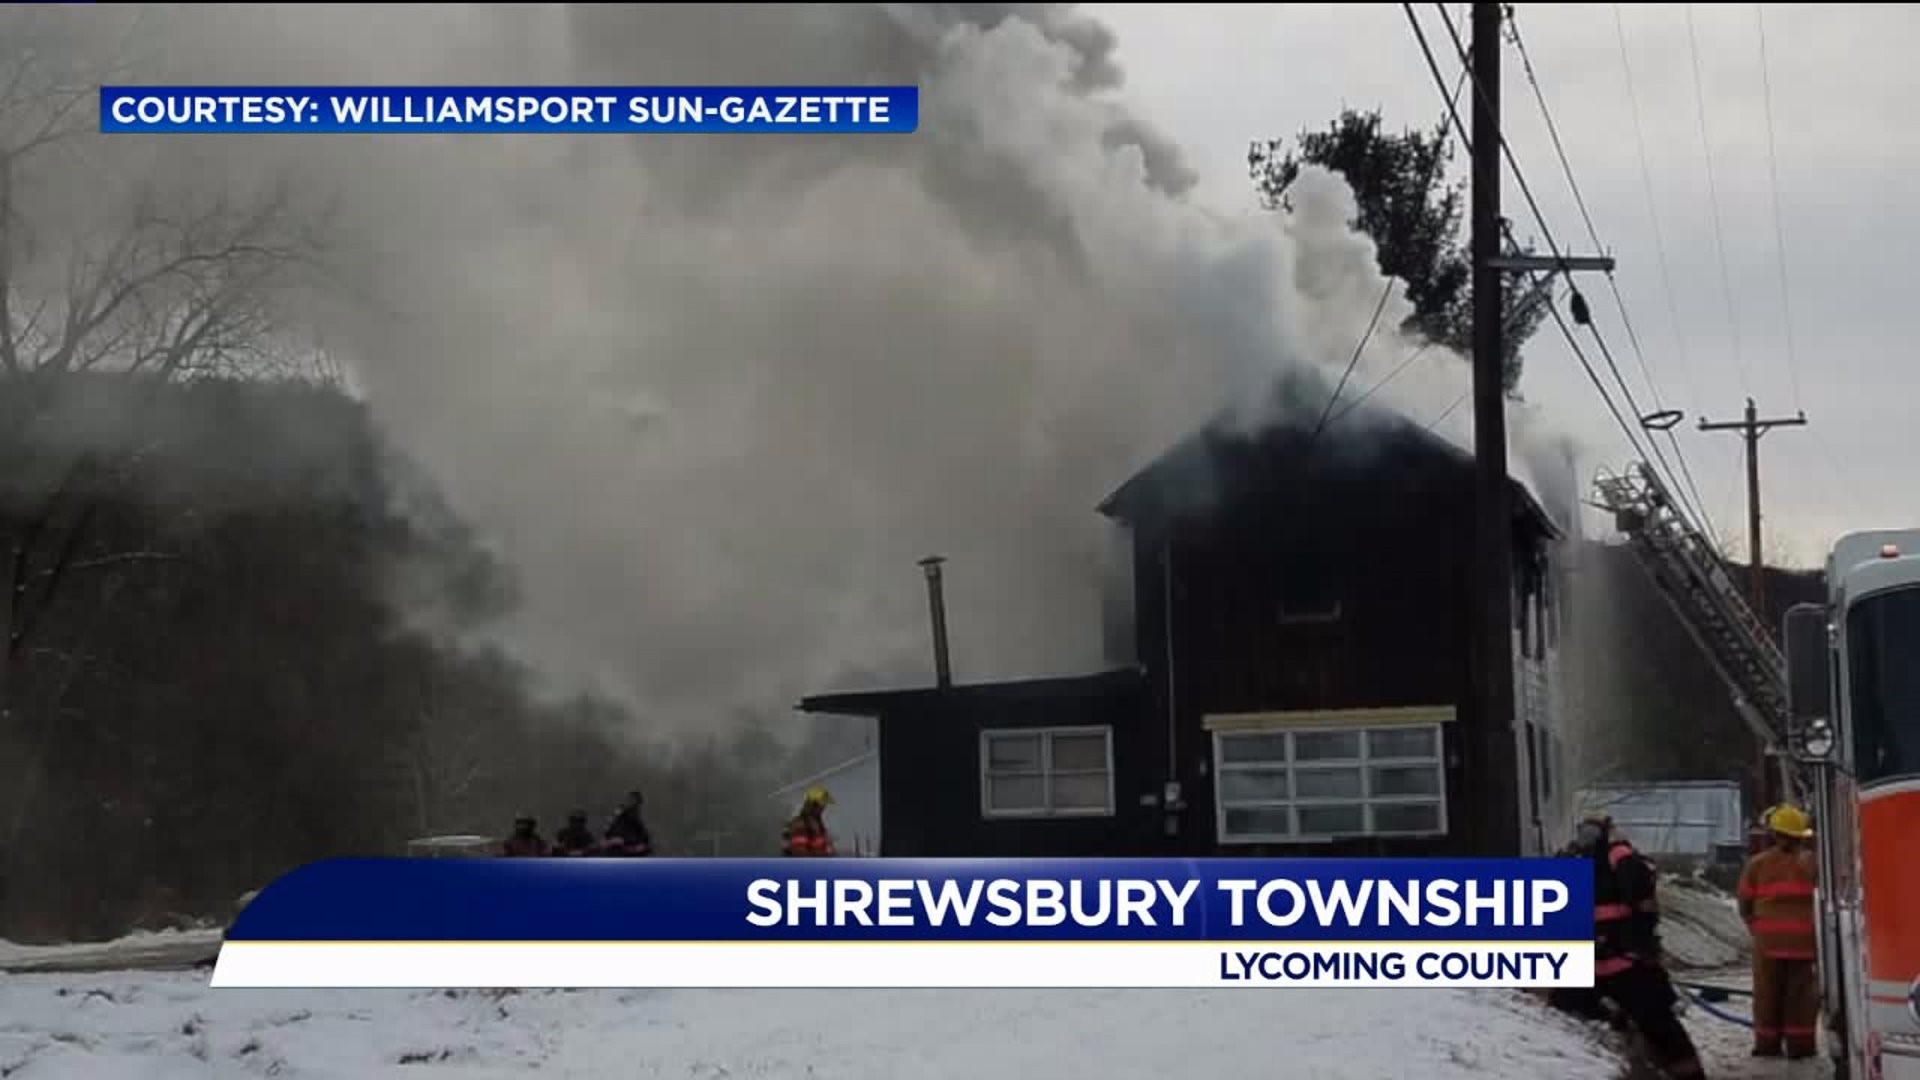 Lycoming County Home Hit by Fire